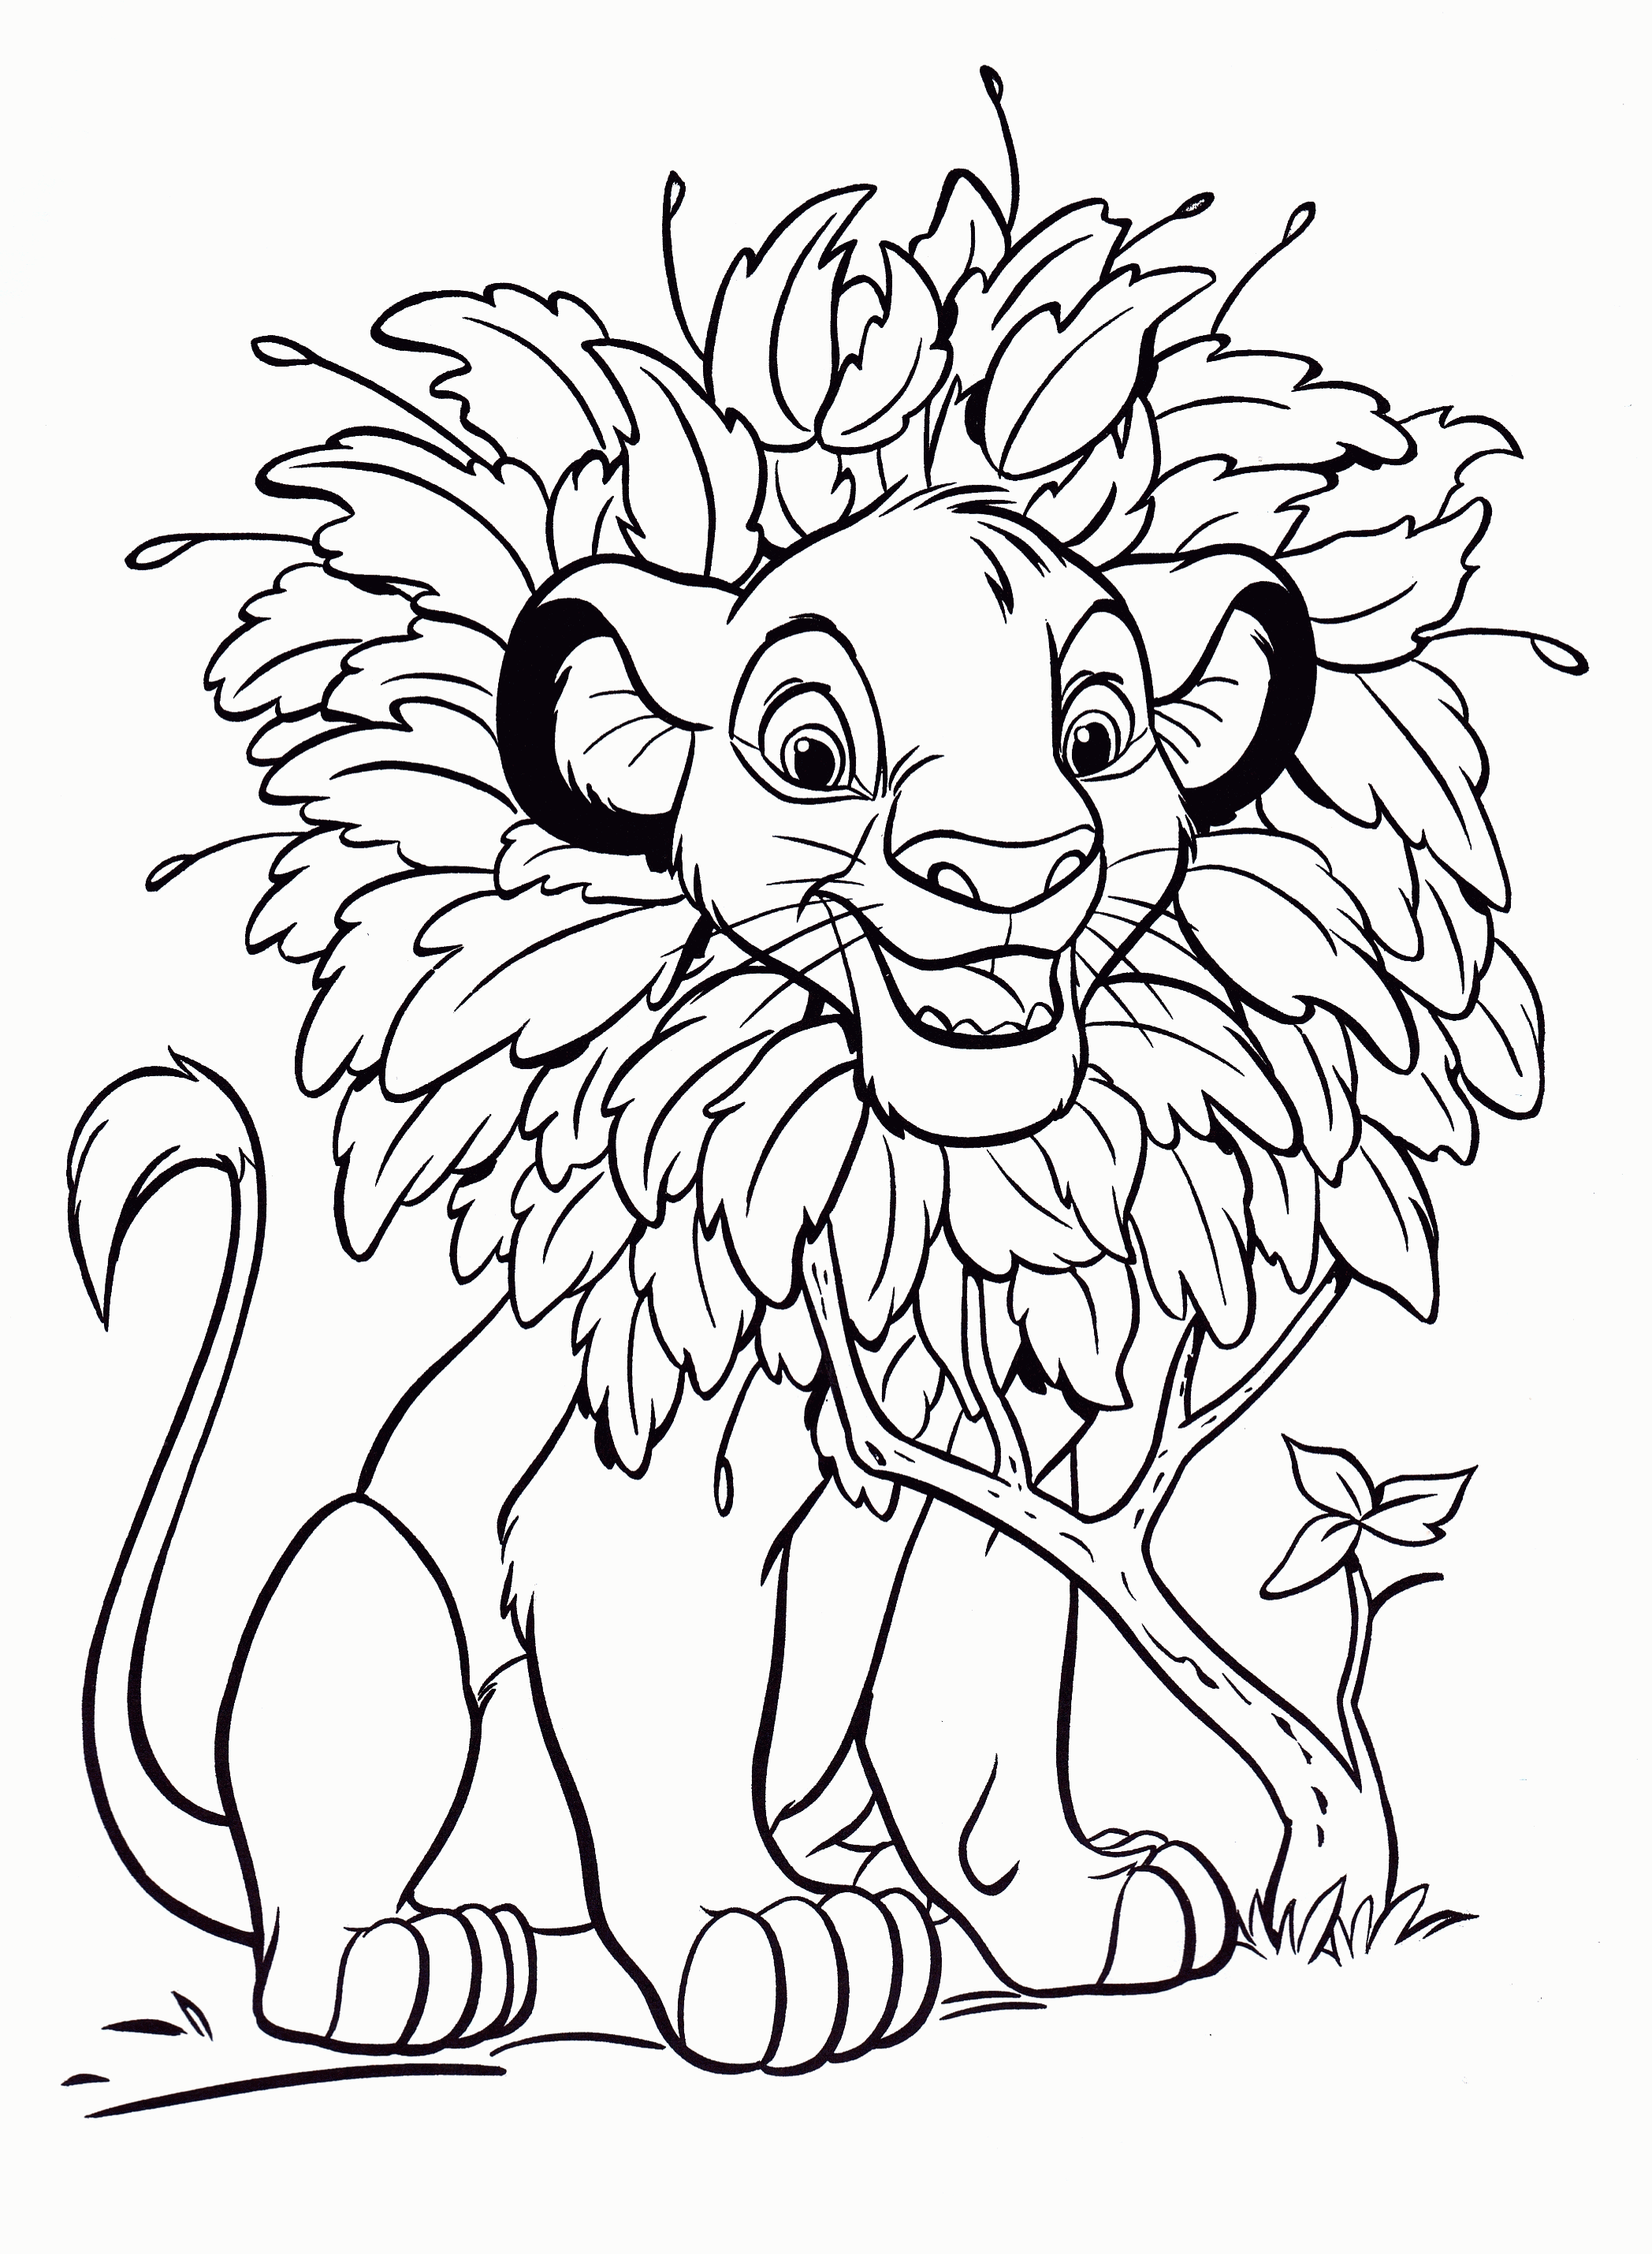 coloring-book-pages-disney-characters-coloring-clip-art-library